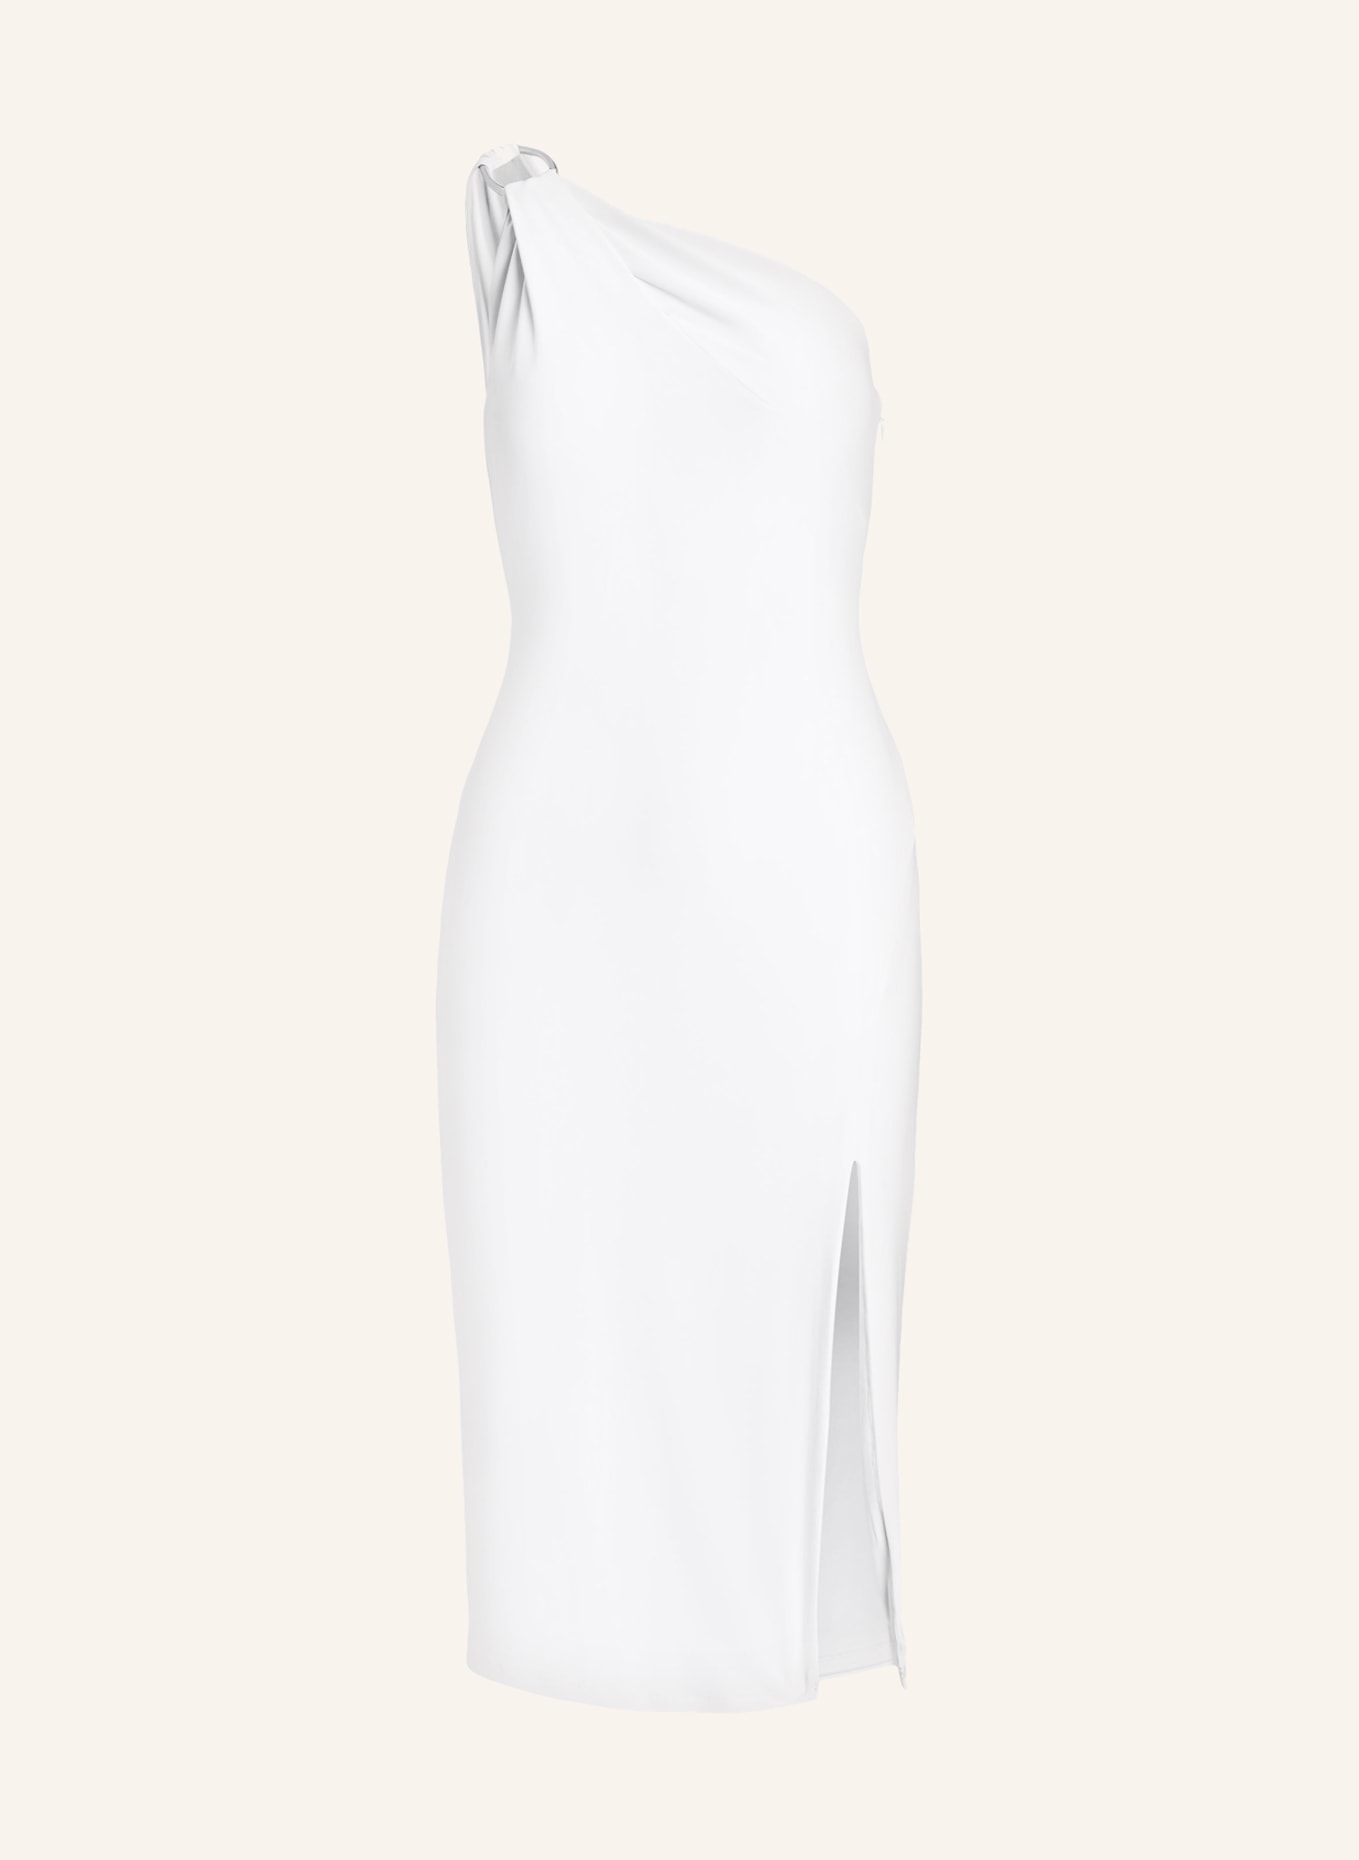 LAUREN RALPH LAUREN One-shoulder dress in jersey with cut-out, Color: WHITE (Image 1)